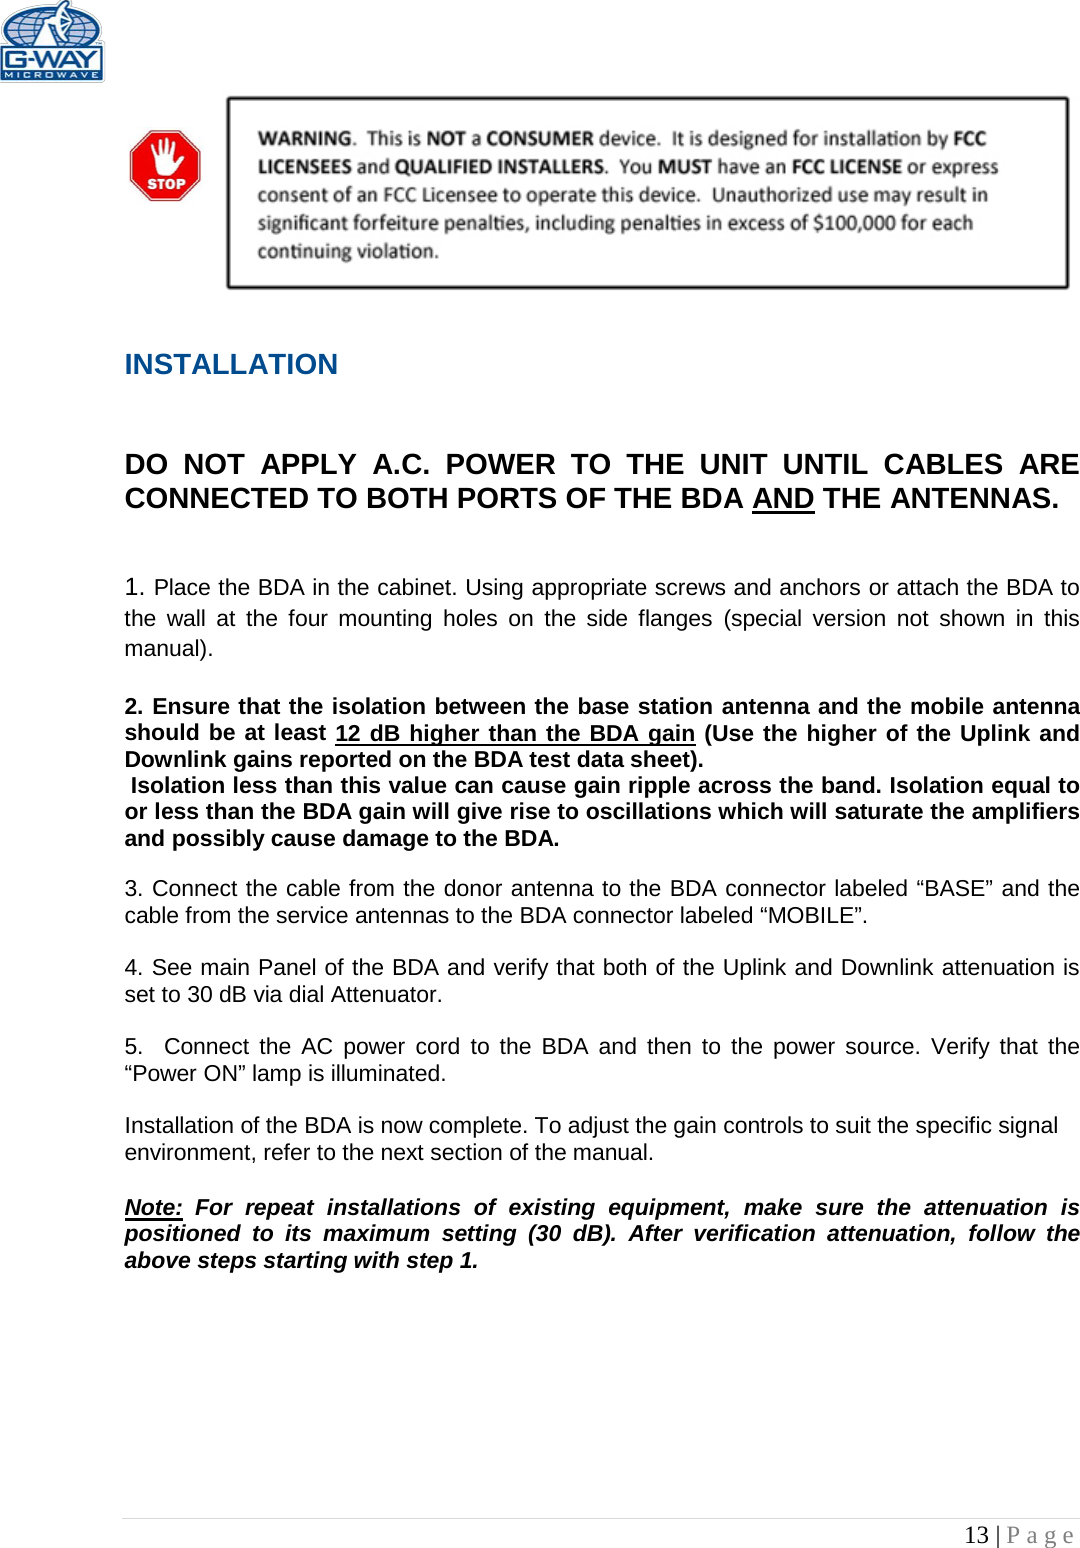   13 | Page   INSTALLATION   DO NOT APPLY A.C. POWER TO THE UNIT UNTIL CABLES ARE CONNECTED TO BOTH PORTS OF THE BDA AND THE ANTENNAS.    1. Place the BDA in the cabinet. Using appropriate screws and anchors or attach the BDA to the wall at the four mounting holes on the side flanges  (special version not shown in this manual).  2. Ensure that the isolation between the base station antenna and the mobile antenna should be at least 12 dB higher than the BDA gain (Use the higher of the Uplink and Downlink gains reported on the BDA test data sheet).  Isolation less than this value can cause gain ripple across the band. Isolation equal to or less than the BDA gain will give rise to oscillations which will saturate the amplifiers and possibly cause damage to the BDA.   3. Connect the cable from the donor antenna to the BDA connector labeled “BASE” and the cable from the service antennas to the BDA connector labeled “MOBILE”.  4. See main Panel of the BDA and verify that both of the Uplink and Downlink attenuation is set to 30 dB via dial Attenuator.    5.  Connect the AC power cord to the BDA and then to the power source. Verify that the “Power ON” lamp is illuminated.   Installation of the BDA is now complete. To adjust the gain controls to suit the specific signal environment, refer to the next section of the manual.  Note: For repeat installations of existing equipment, make sure the attenuation is positioned to its maximum setting (30 dB). After verification attenuation, follow the above steps starting with step 1.      